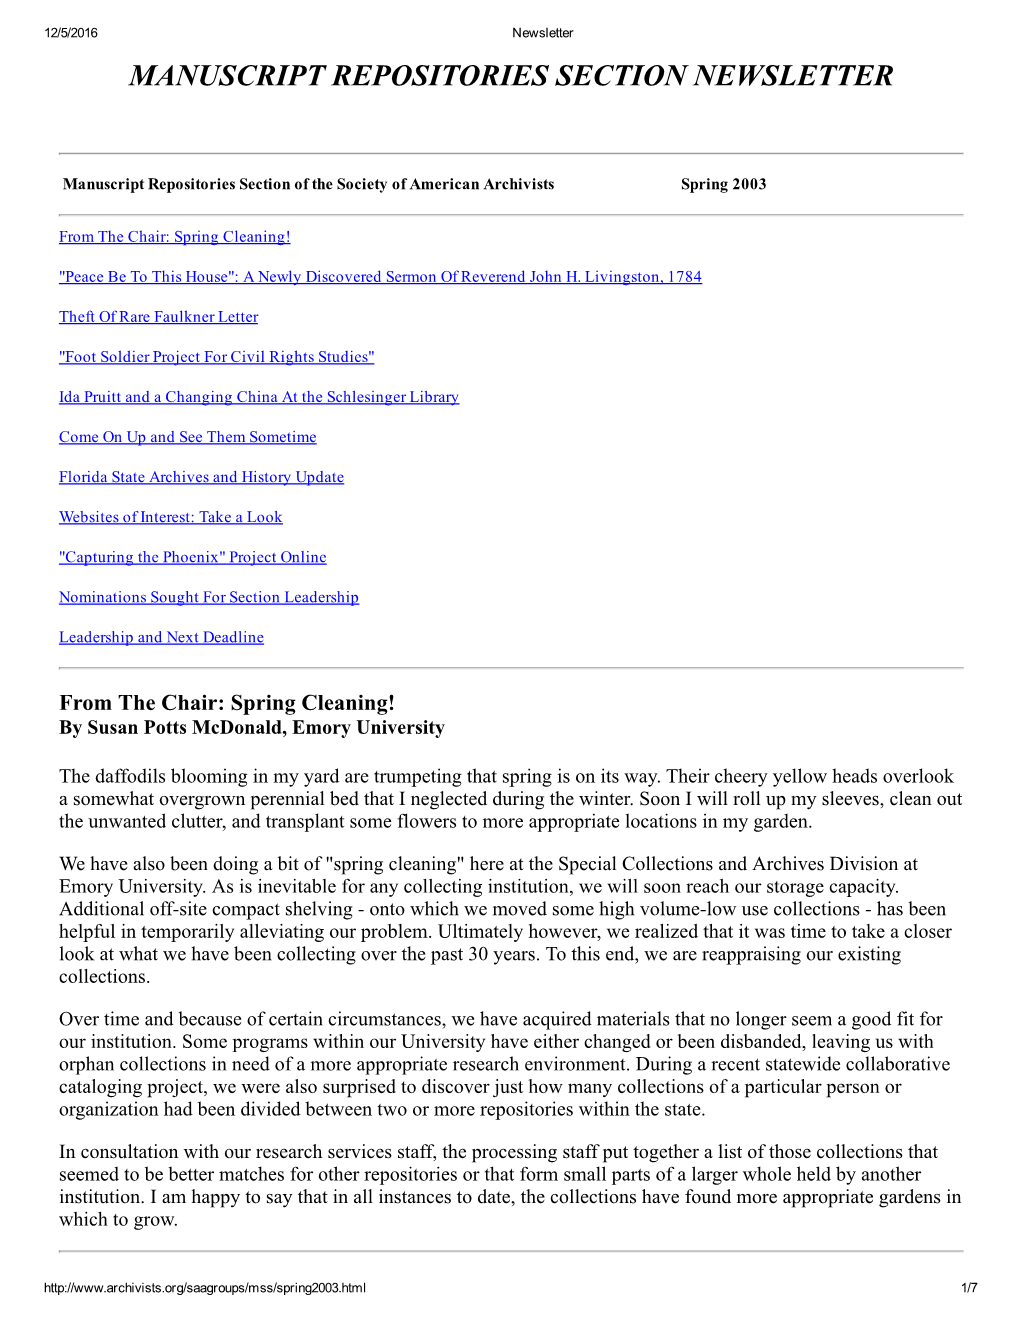 Manuscript Repositories Section Newsletter